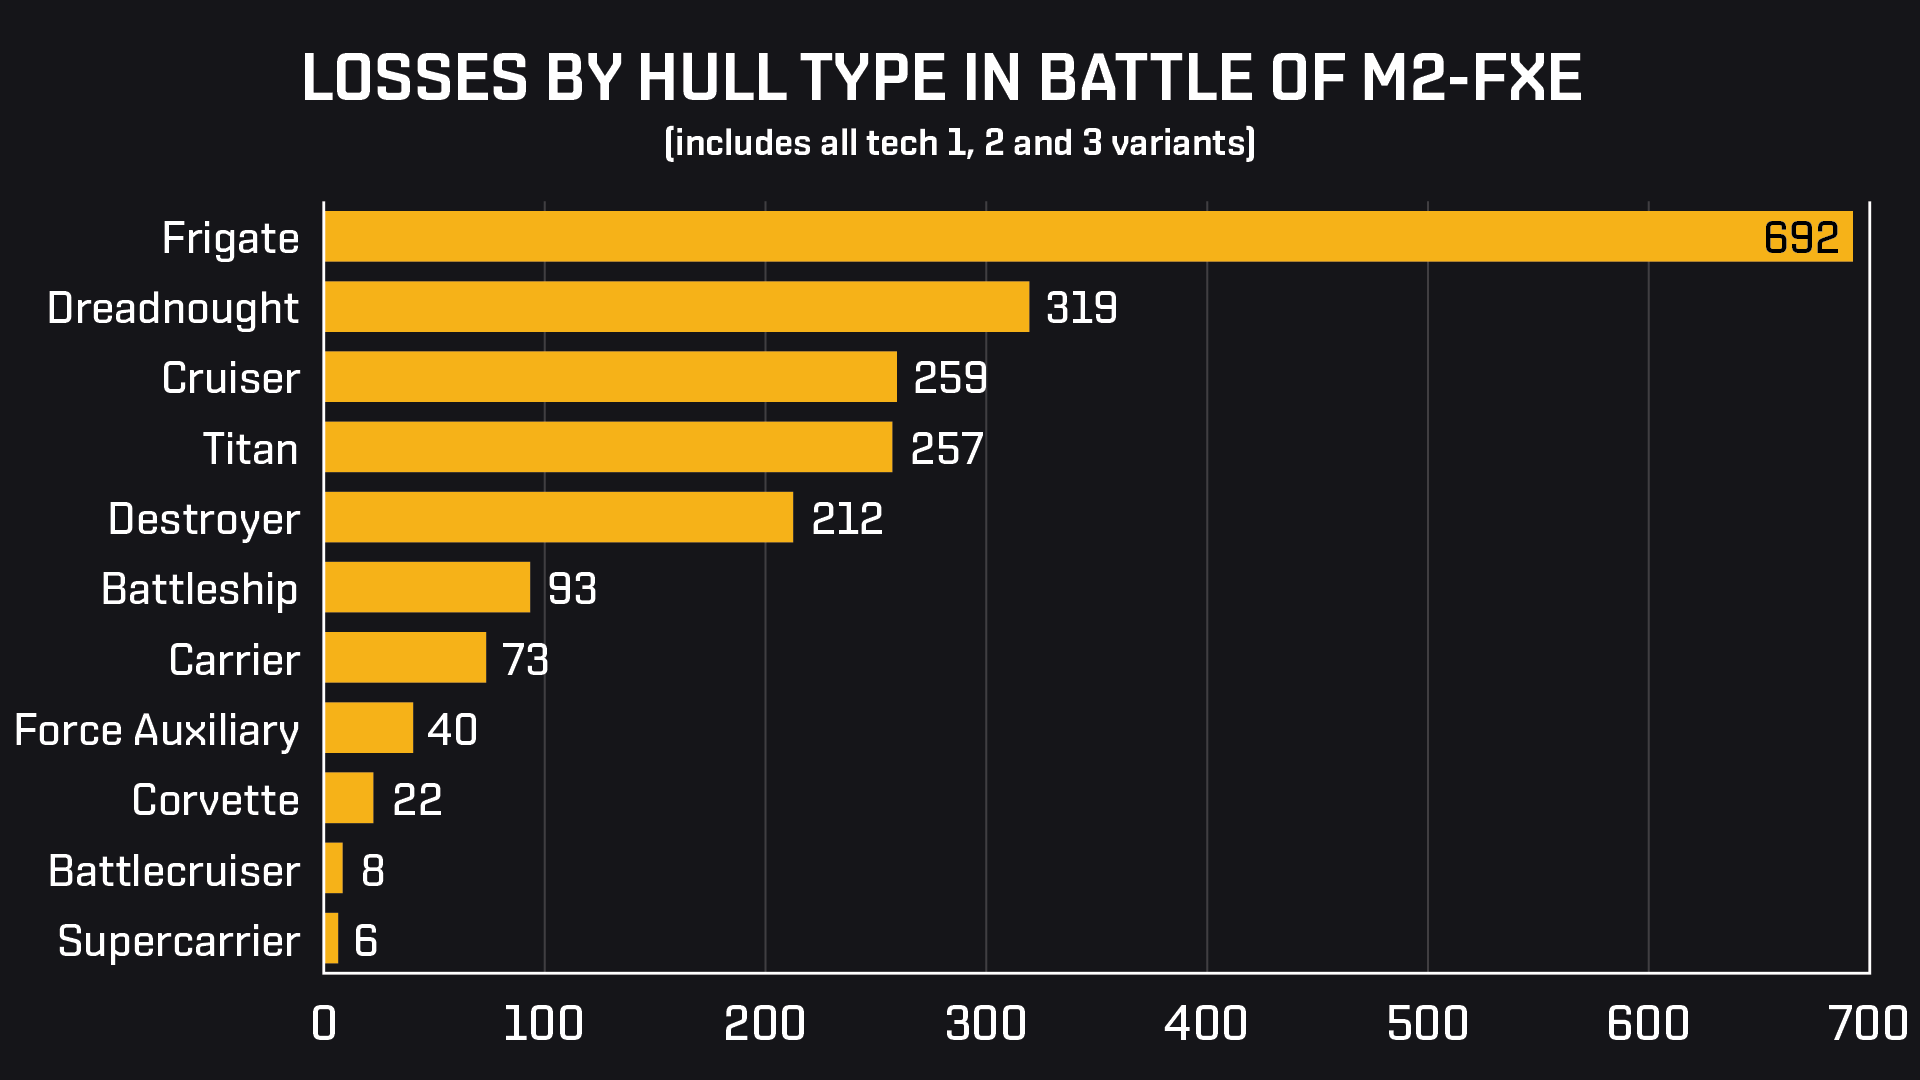 M2 Losses by Hull Type